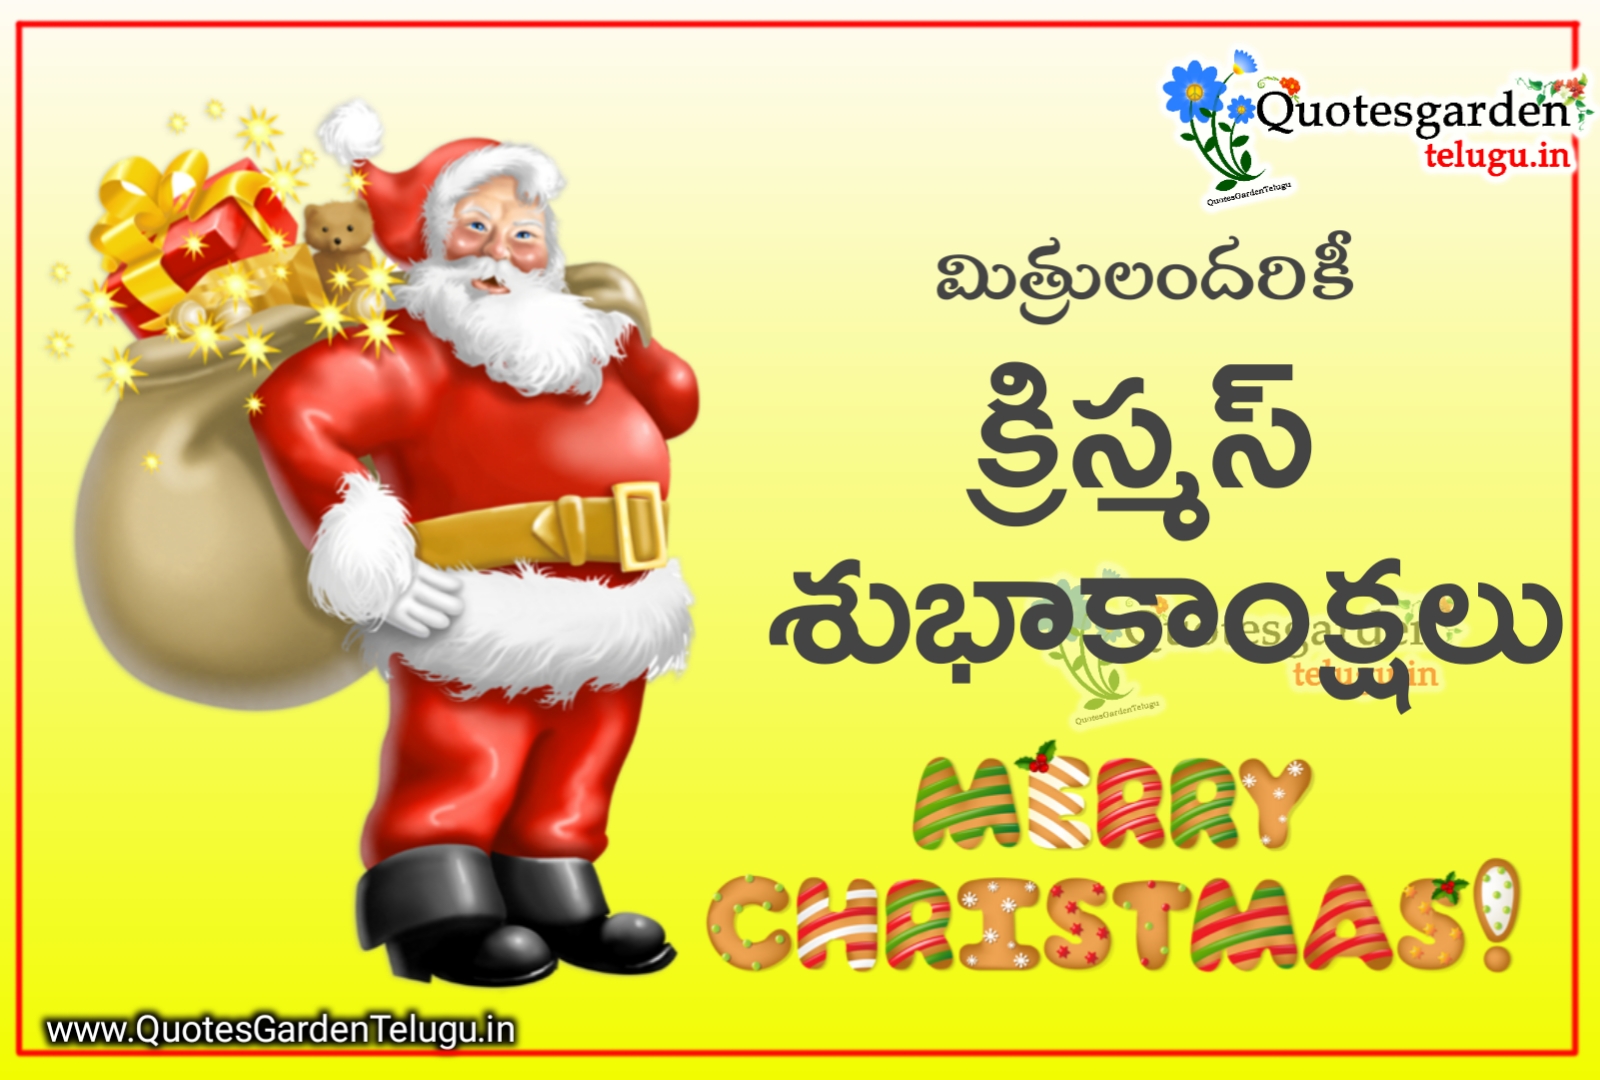 Merry Christmas Happy New Year Greeting Wishes Images In Telugu